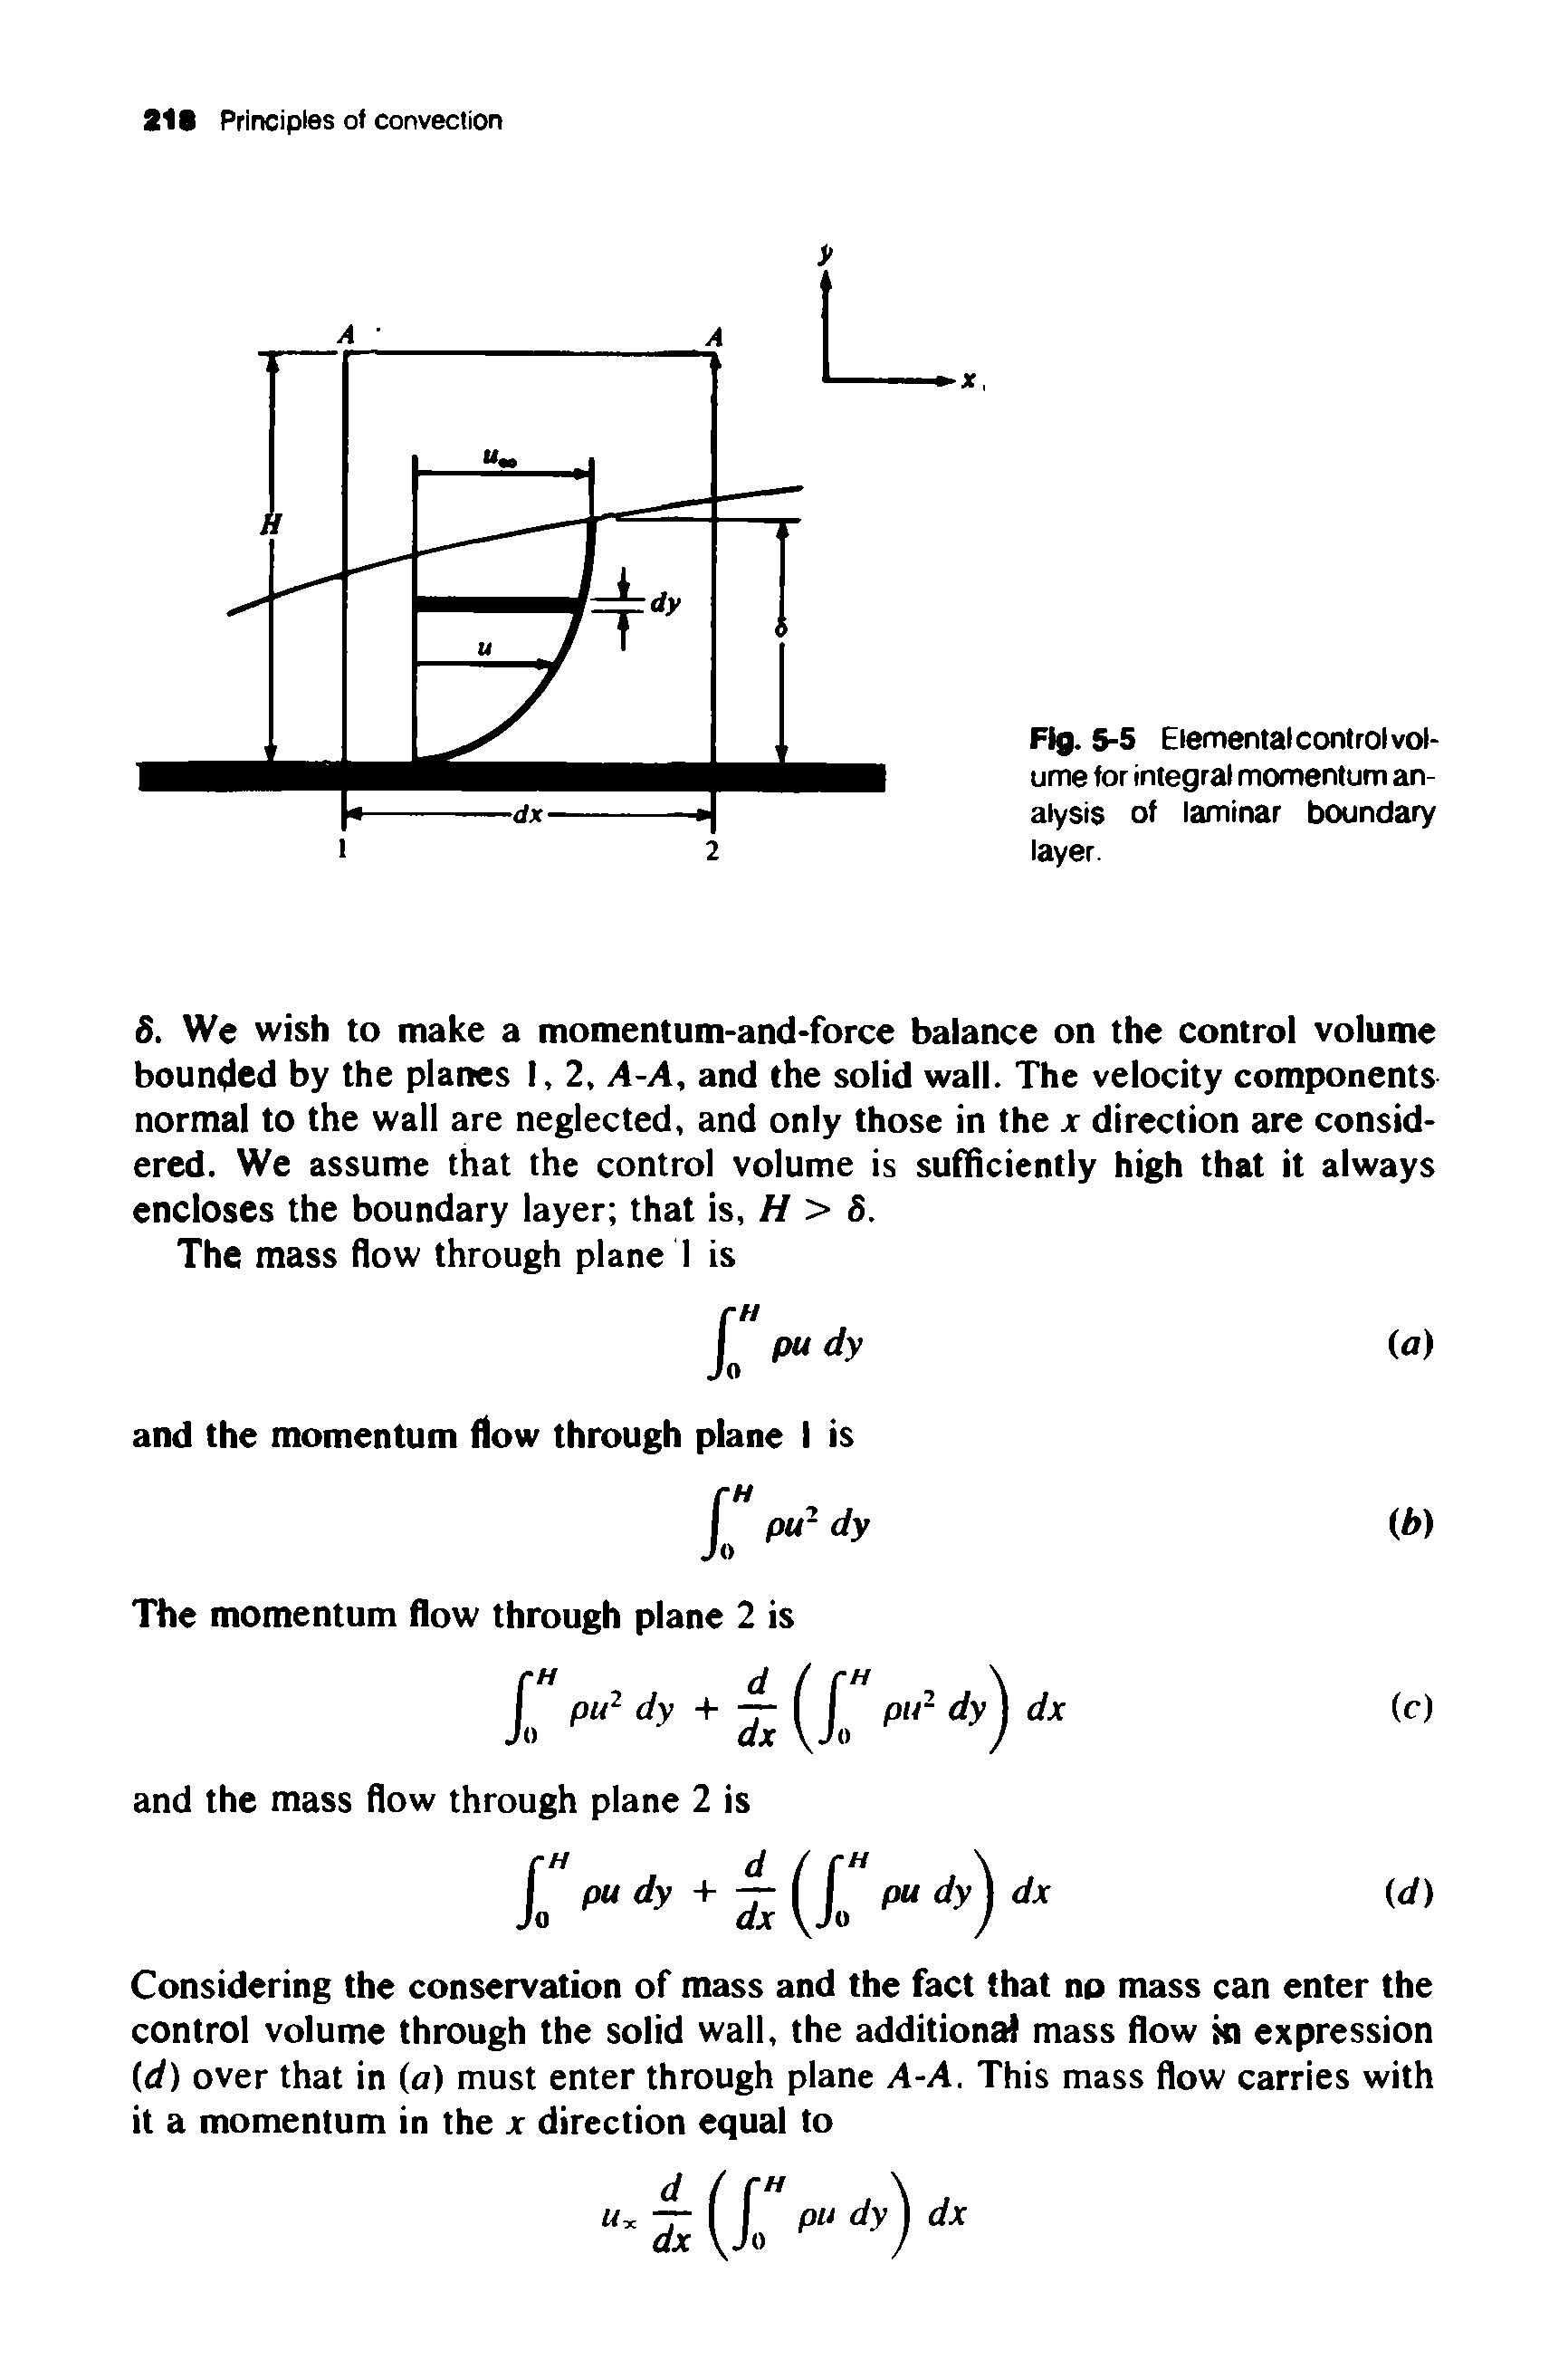 Fig. 5-5 Elemental control volume for integral momentum analysis of laminar boundary layer.